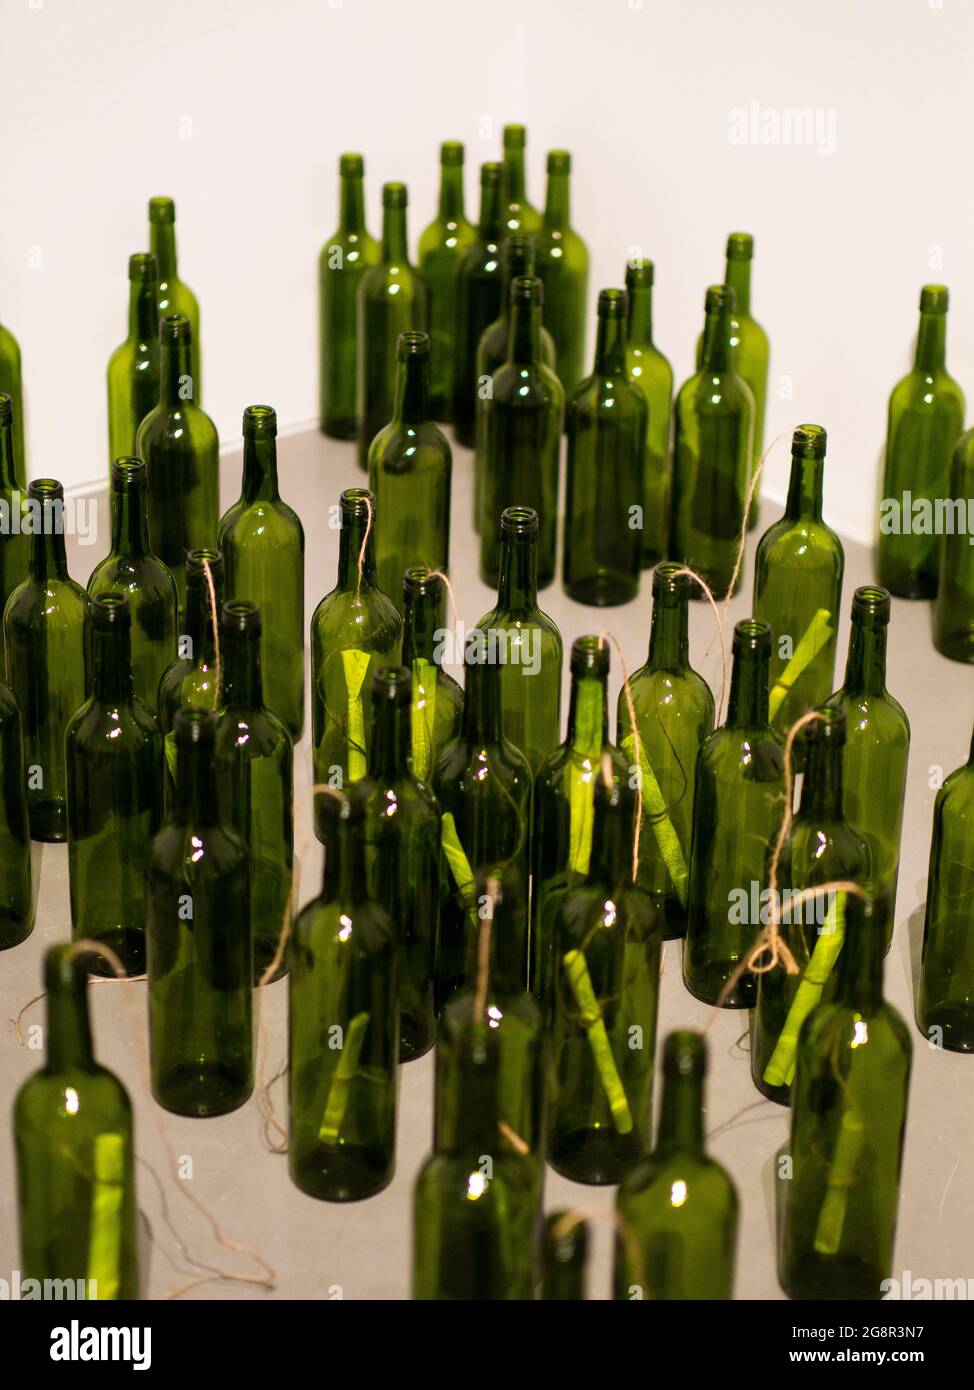 Bottles with messages inside Stock Photo